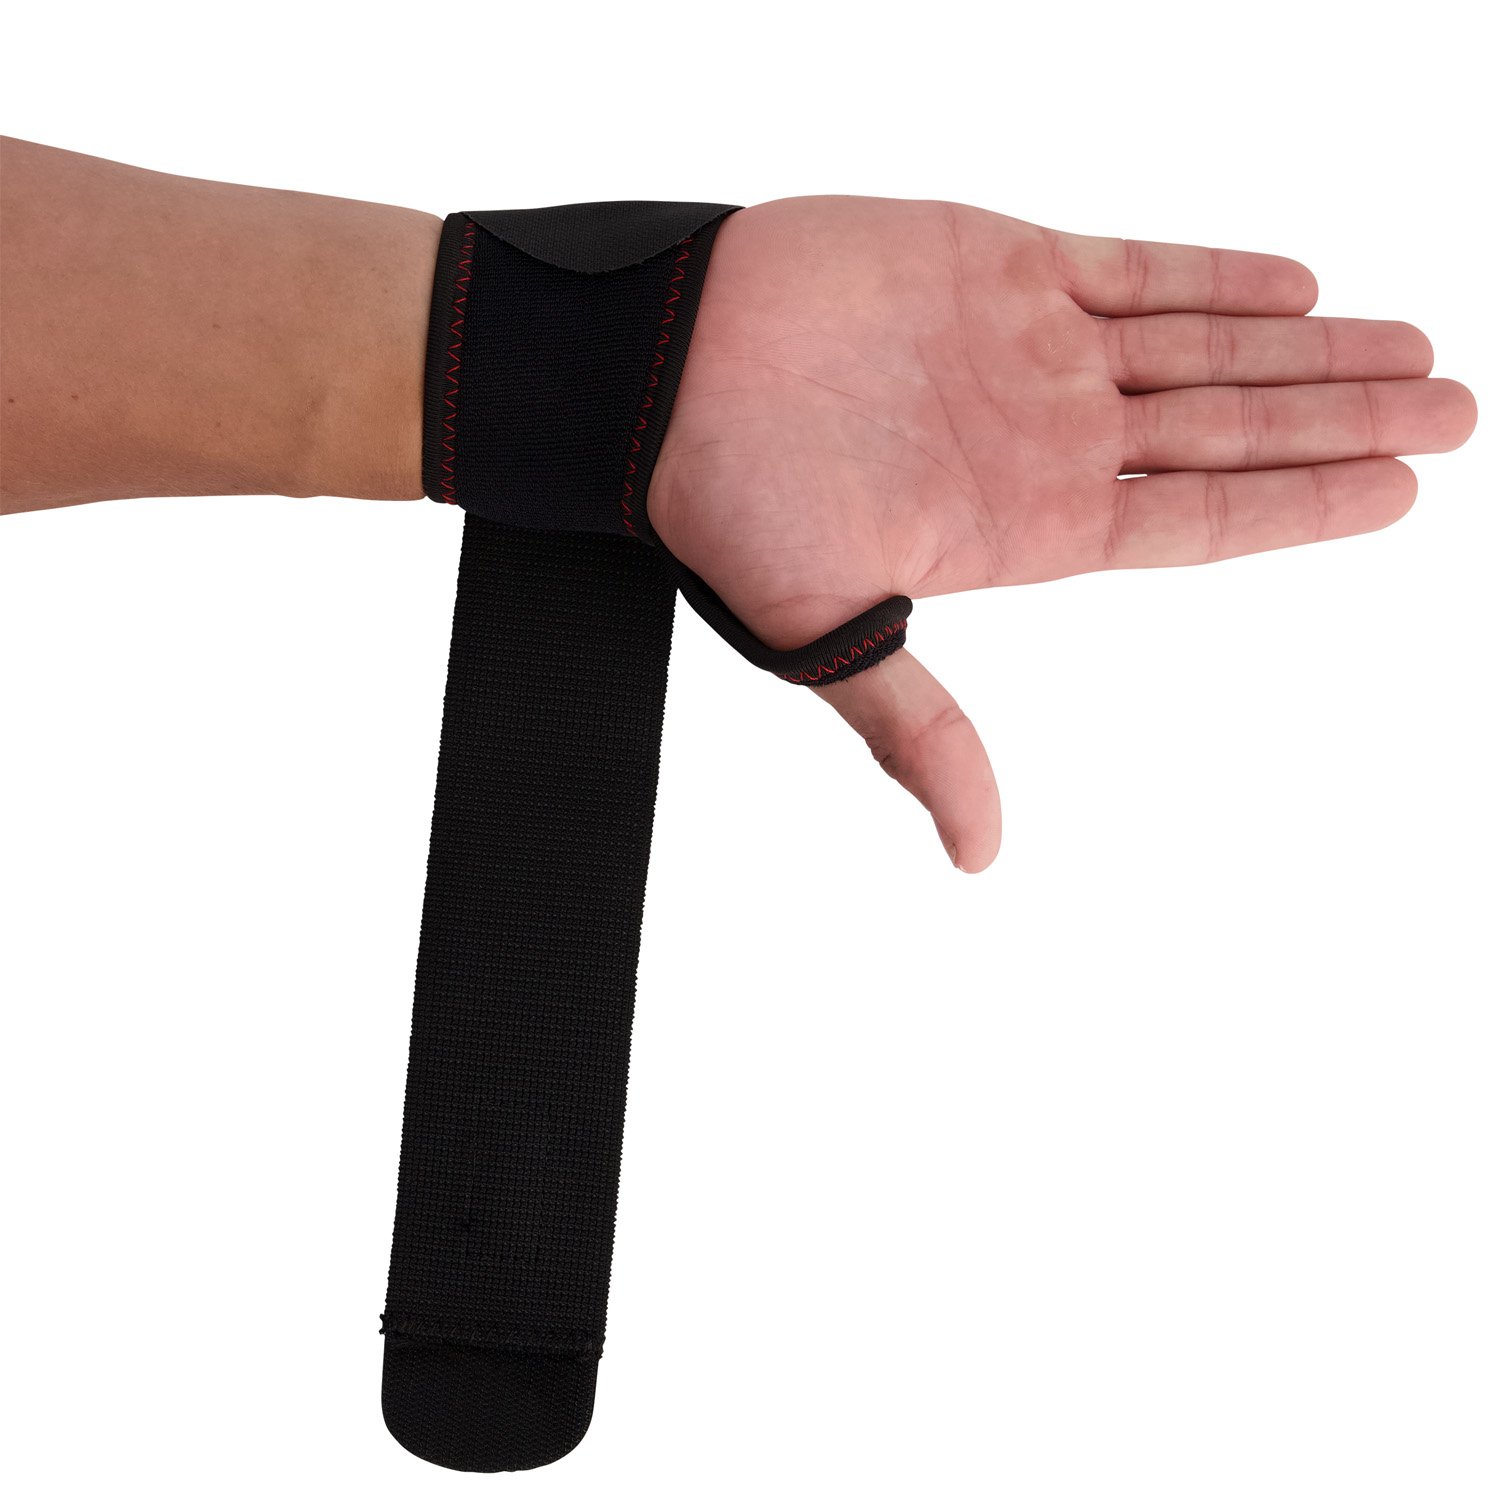 gladiator sports wrist support with thumb opening strap down